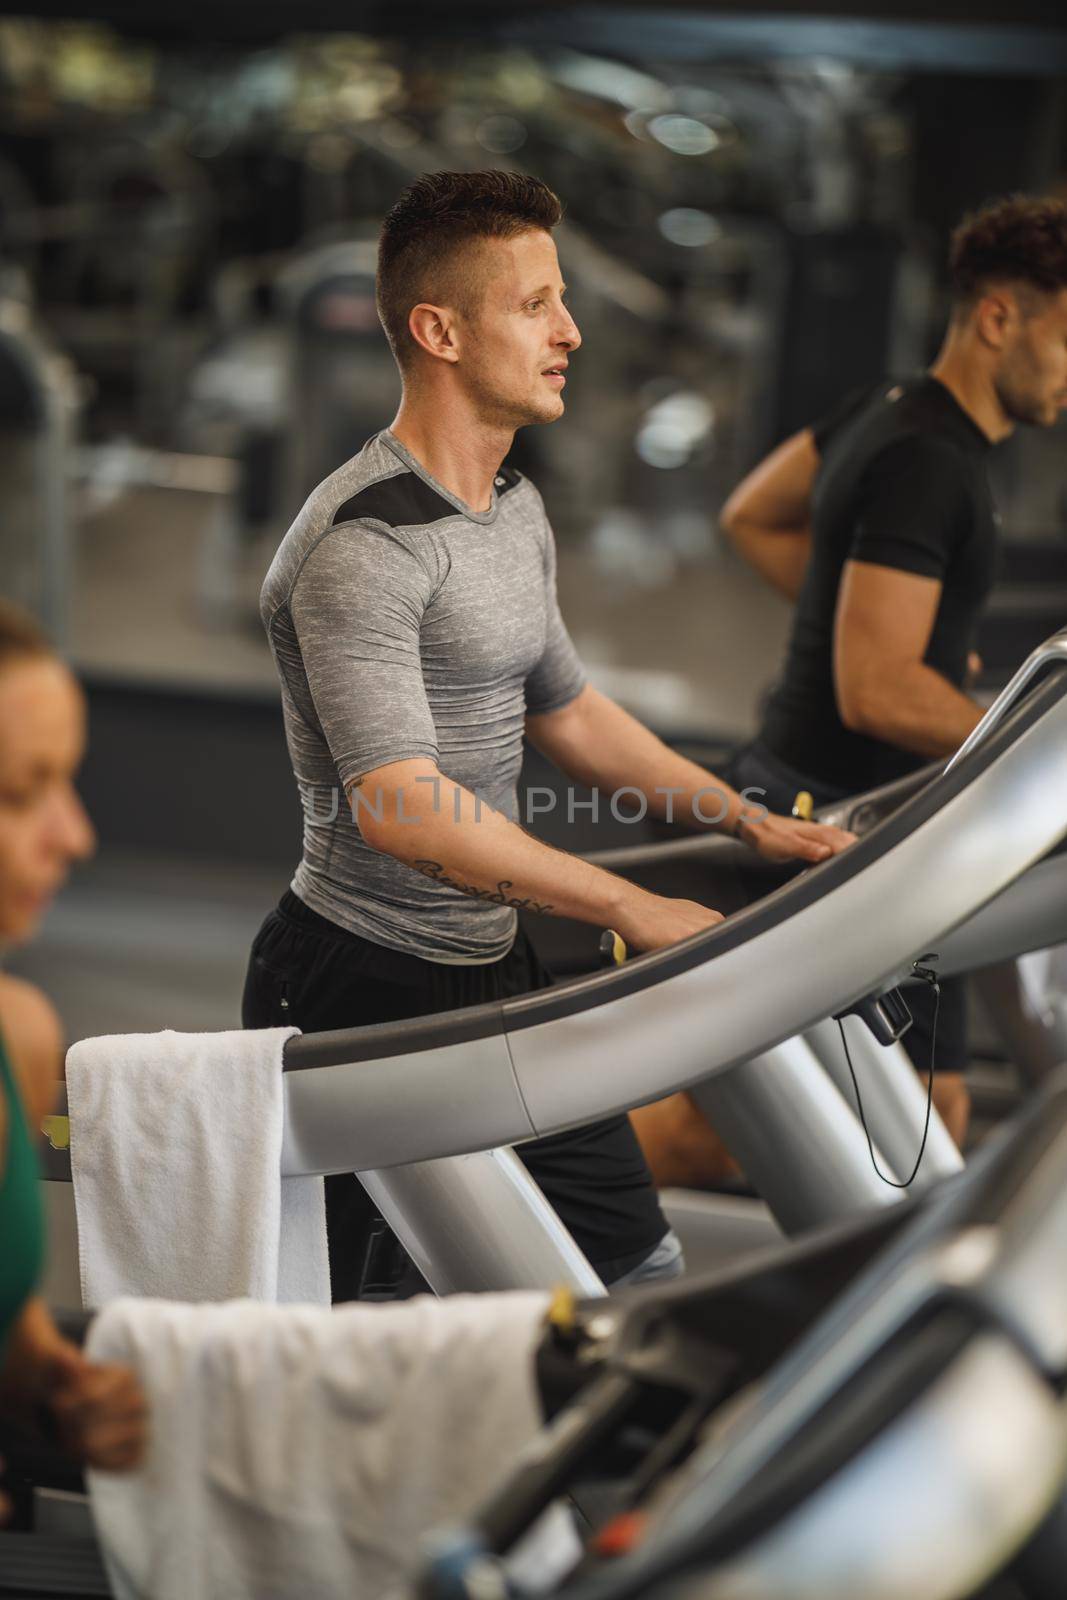 Shot of a young man exercising on a treadmill at the gym.